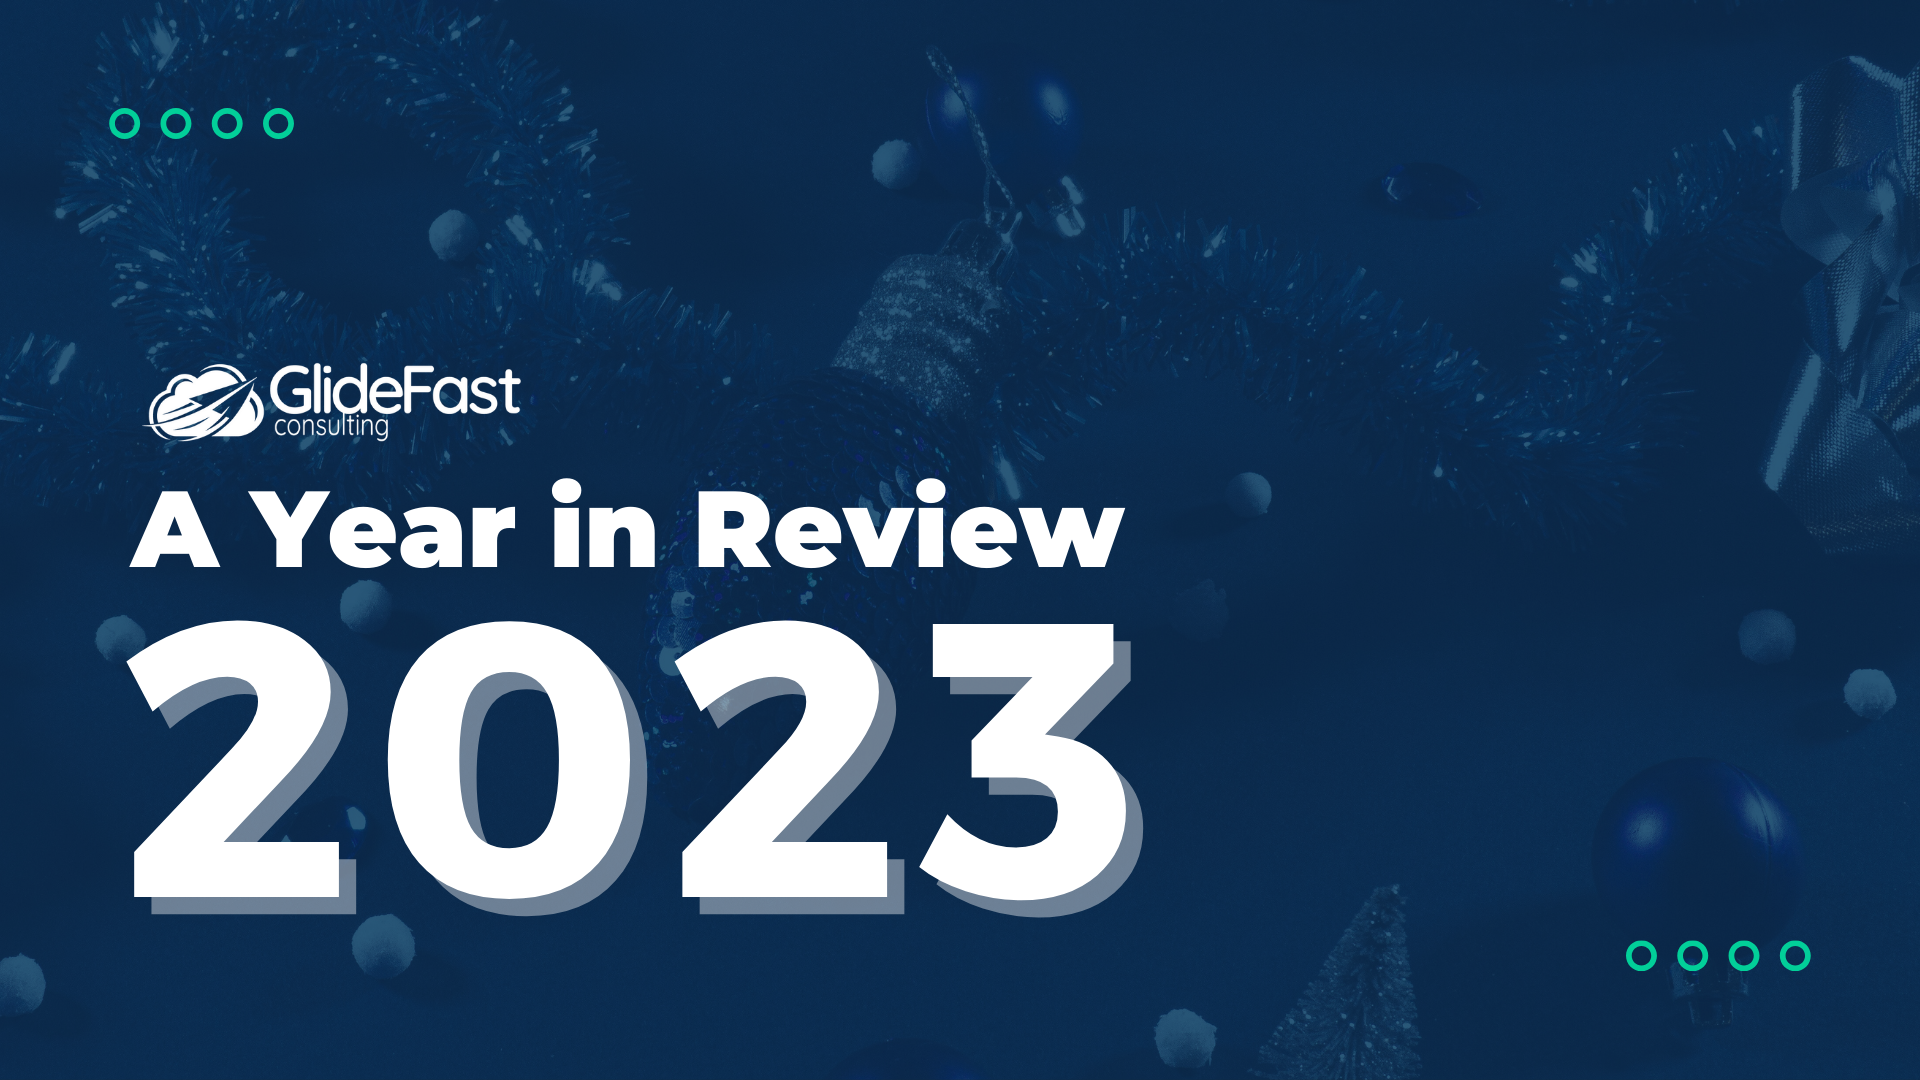 GlideFast Consulting: A Year in Review (2023)